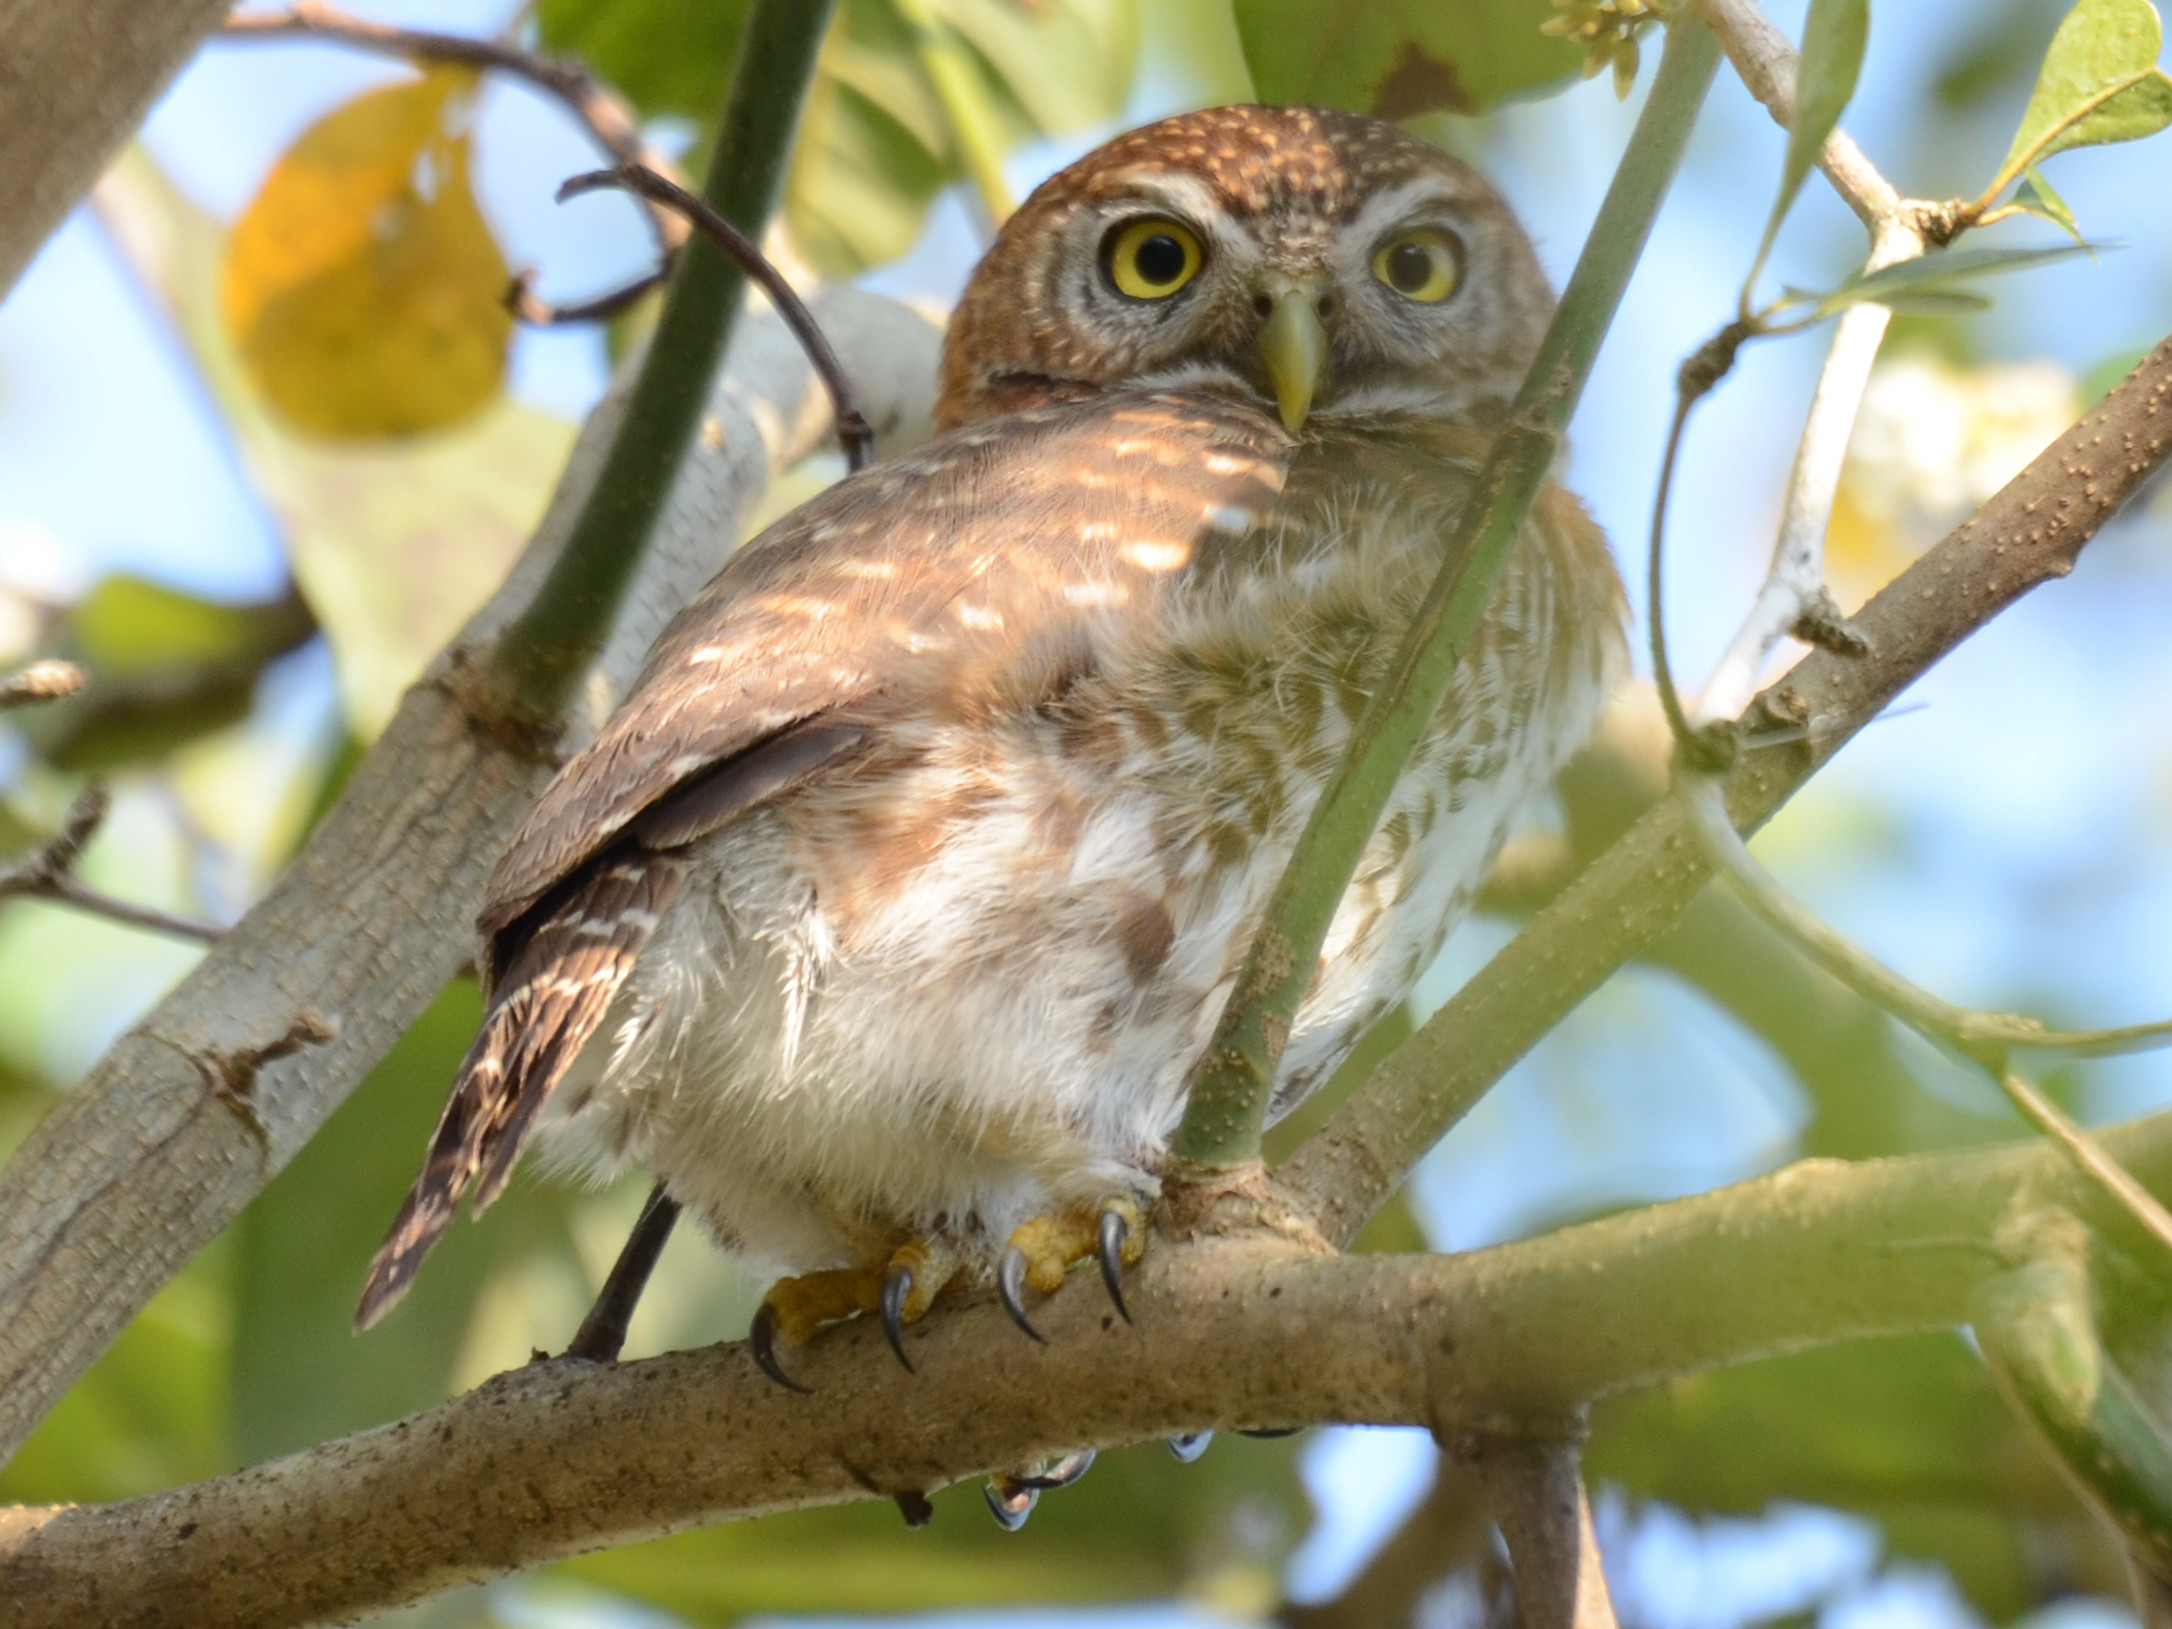 Click picture to see more Cuban Pygmy-Owls.